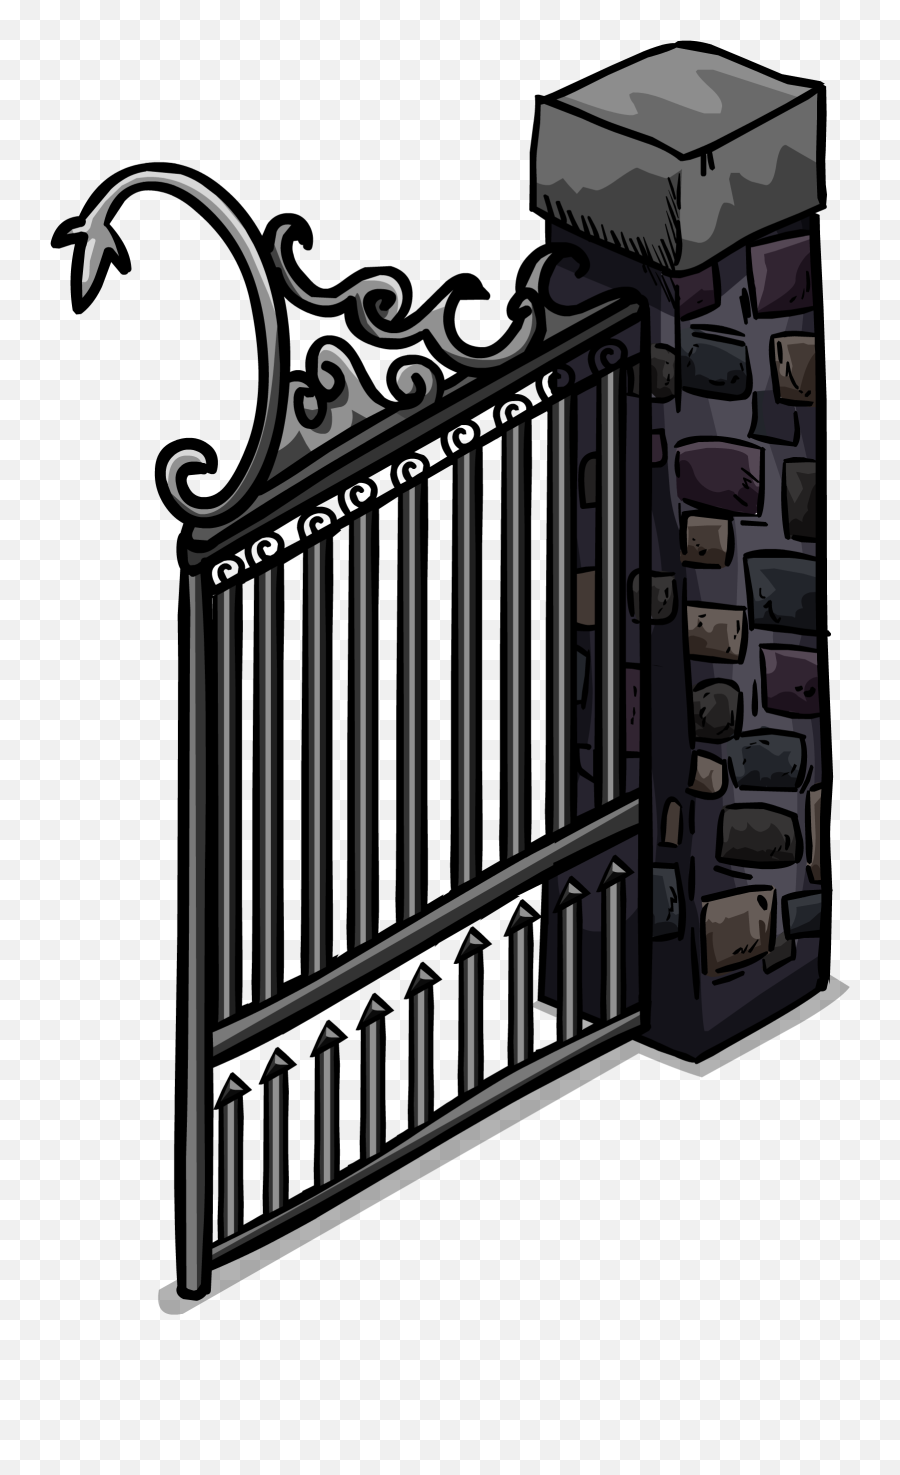 Download Iron Gate Sprite 005 - Balcony Full Size Png Balcony,Balcony Png